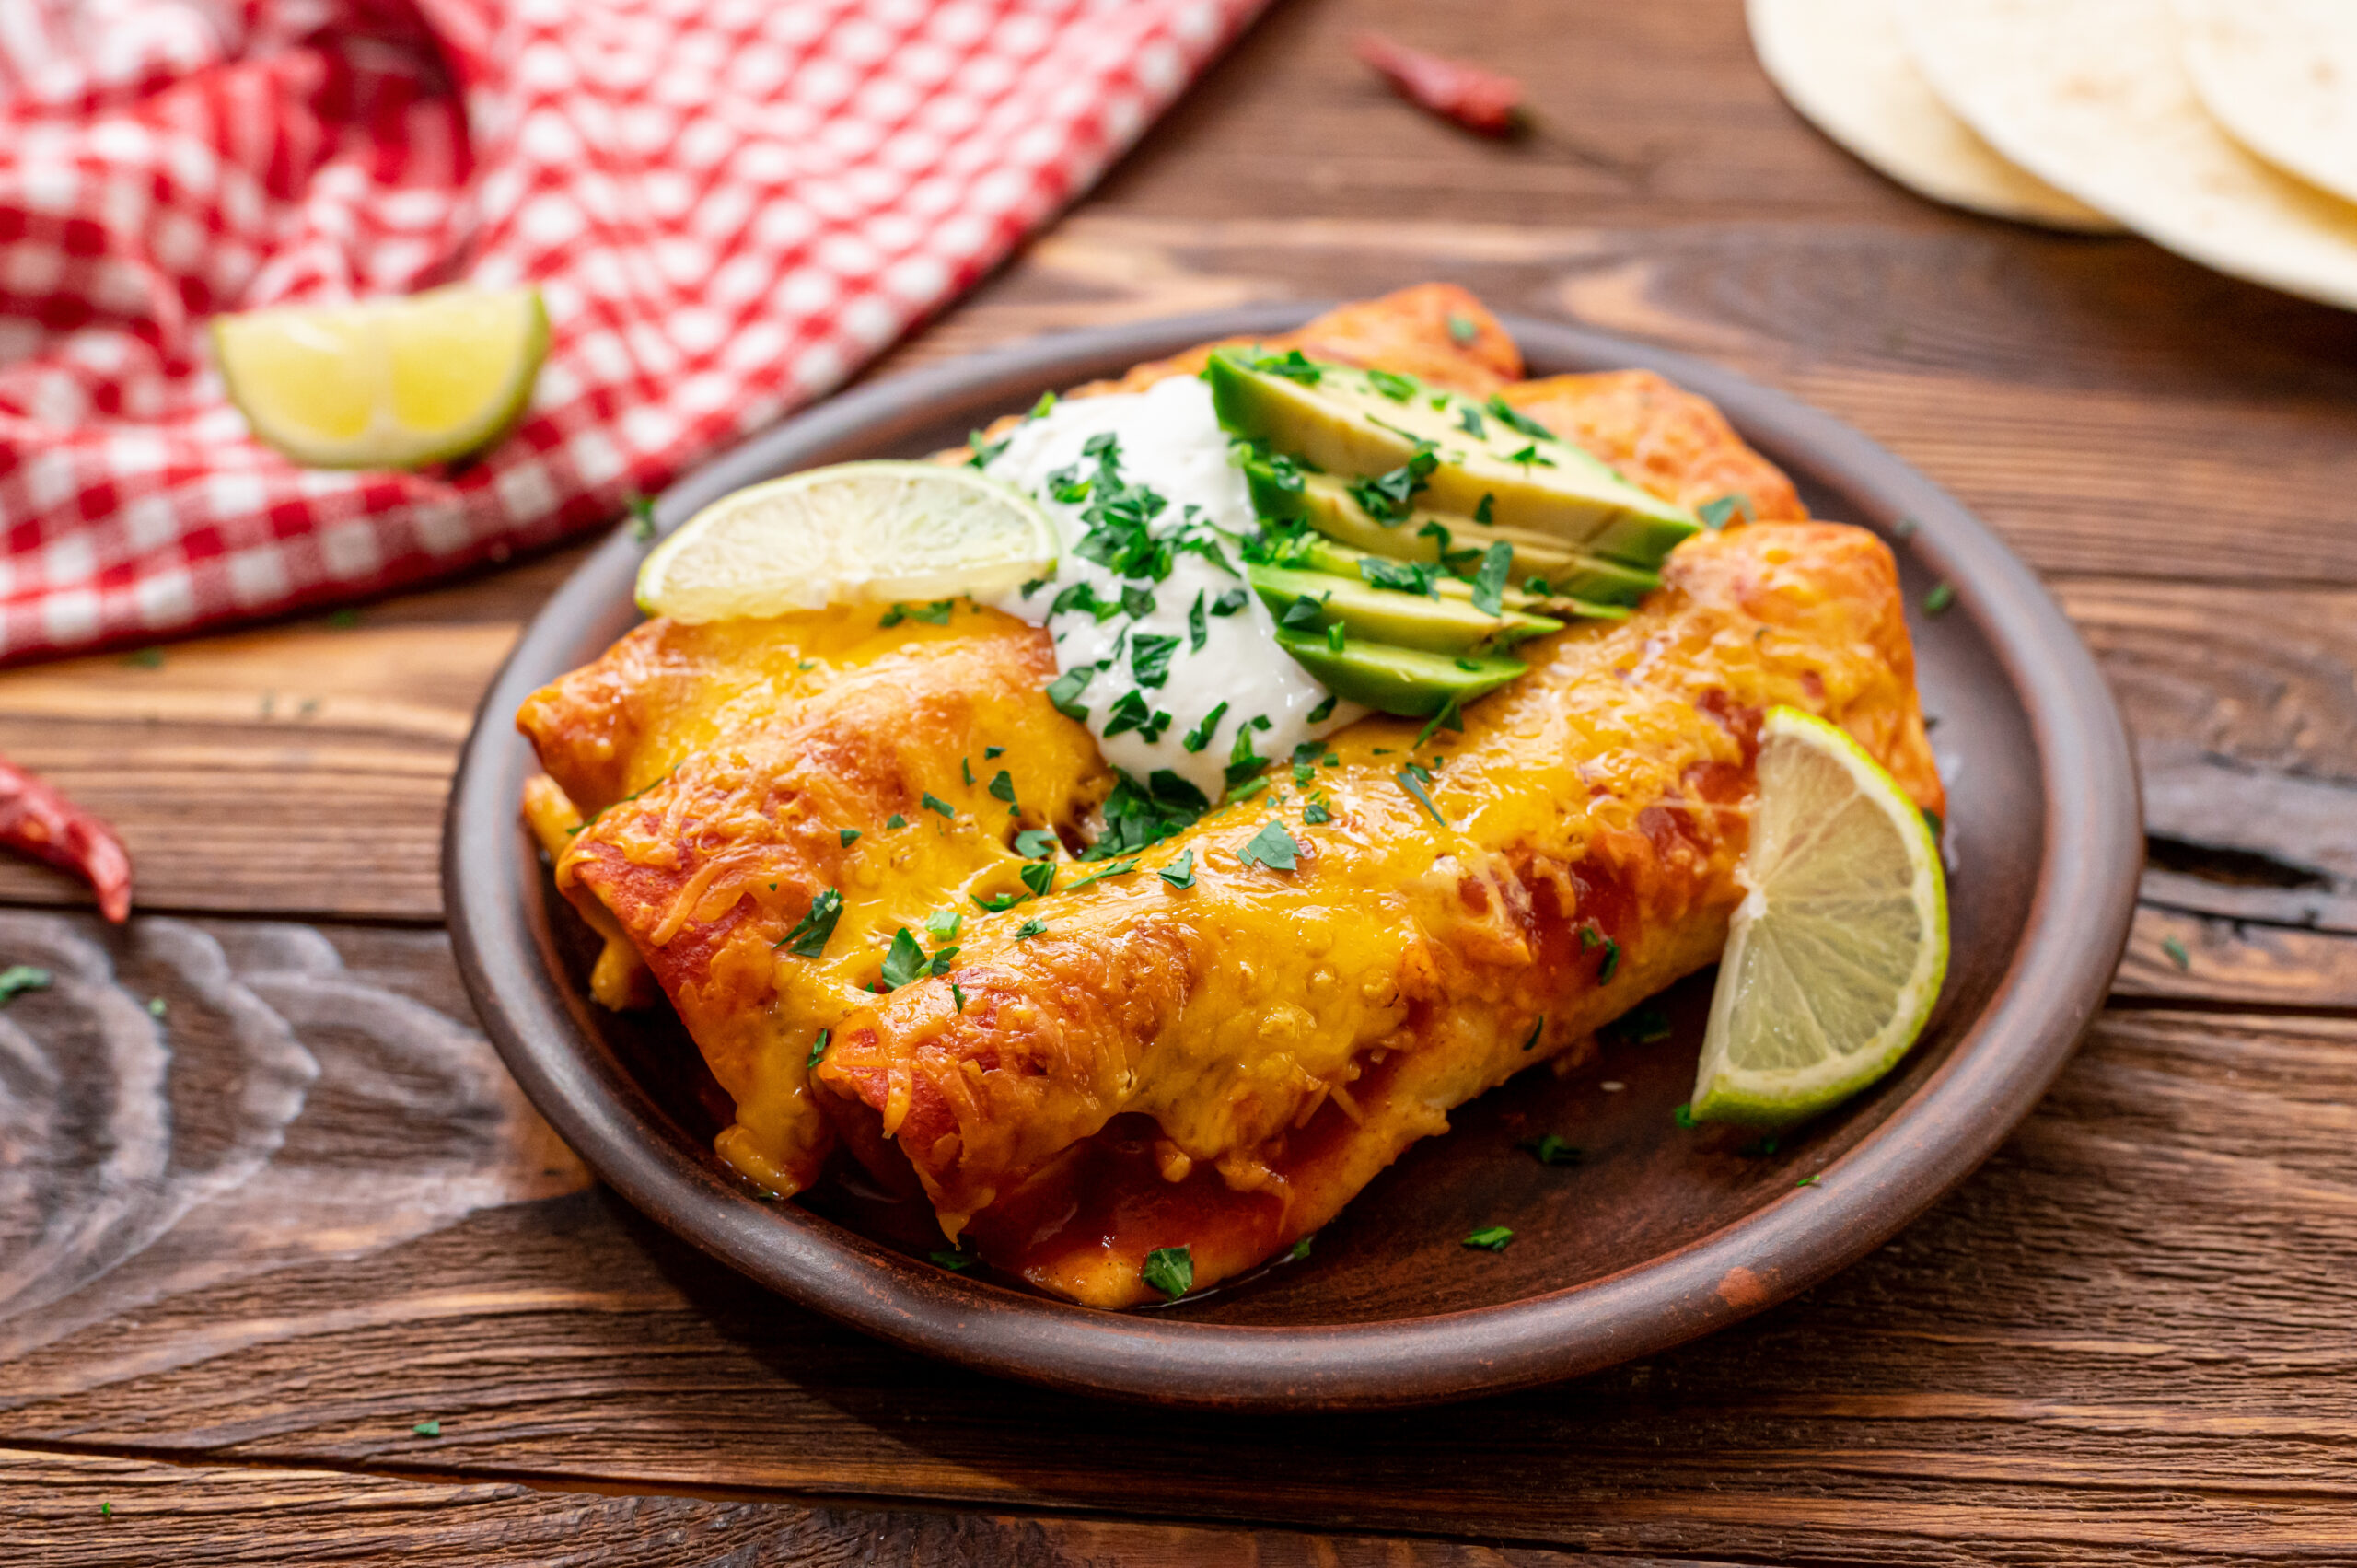 beef enchiladas served with sour cream and avocado slices on top.